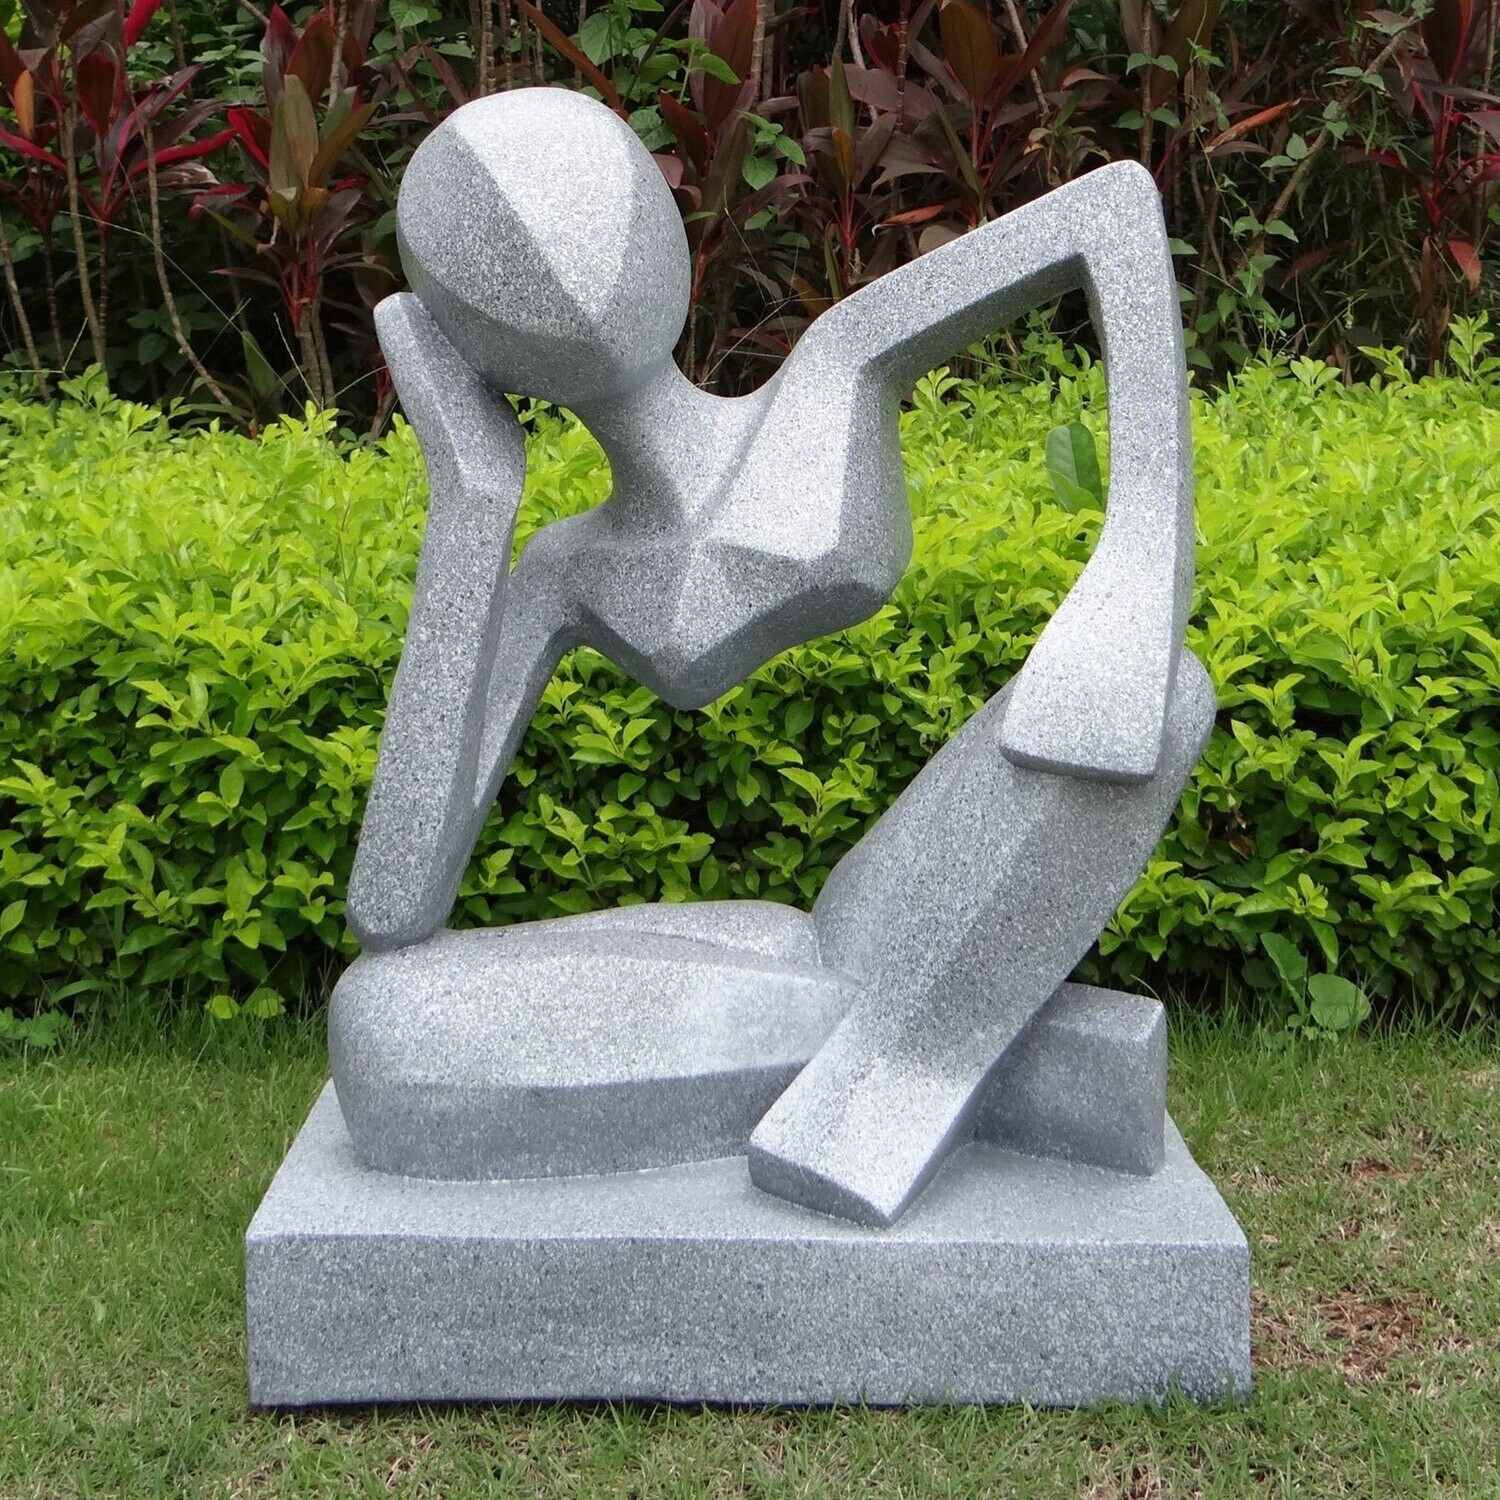 Captivating Sculpture: A Mesmerizing Piece for Her